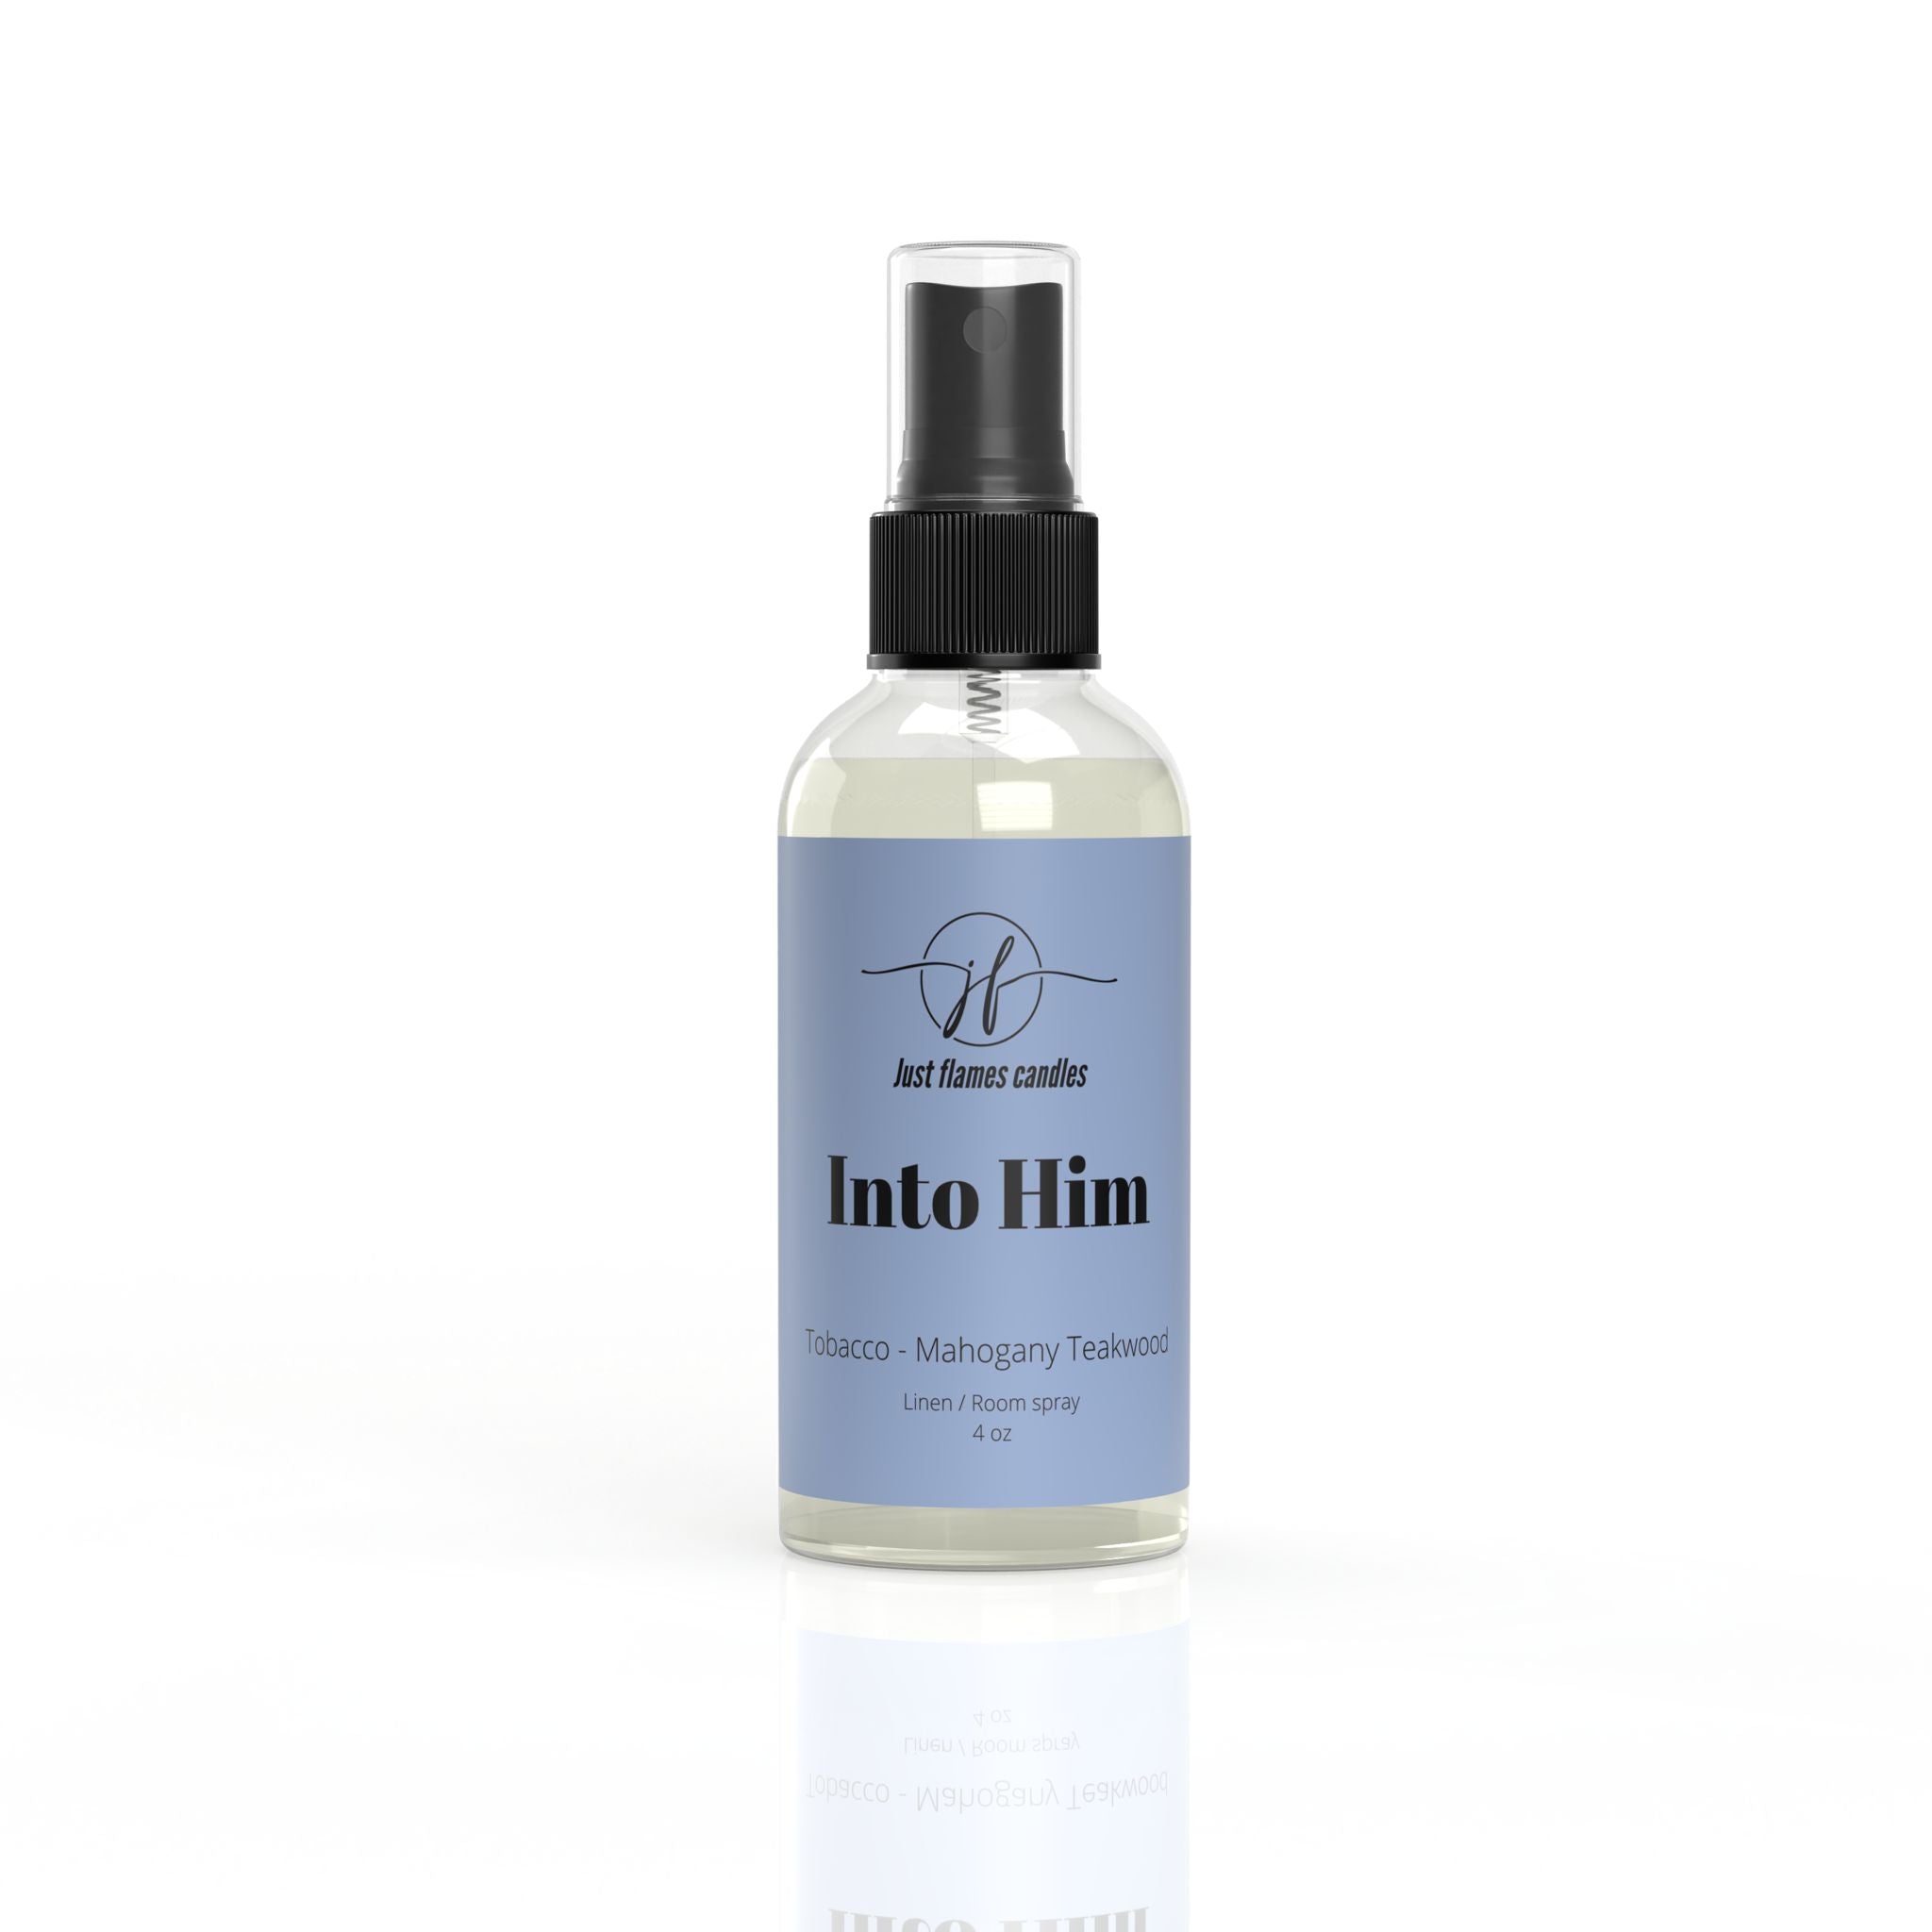 Into Him Linen/Room spray – Just Flame Candles